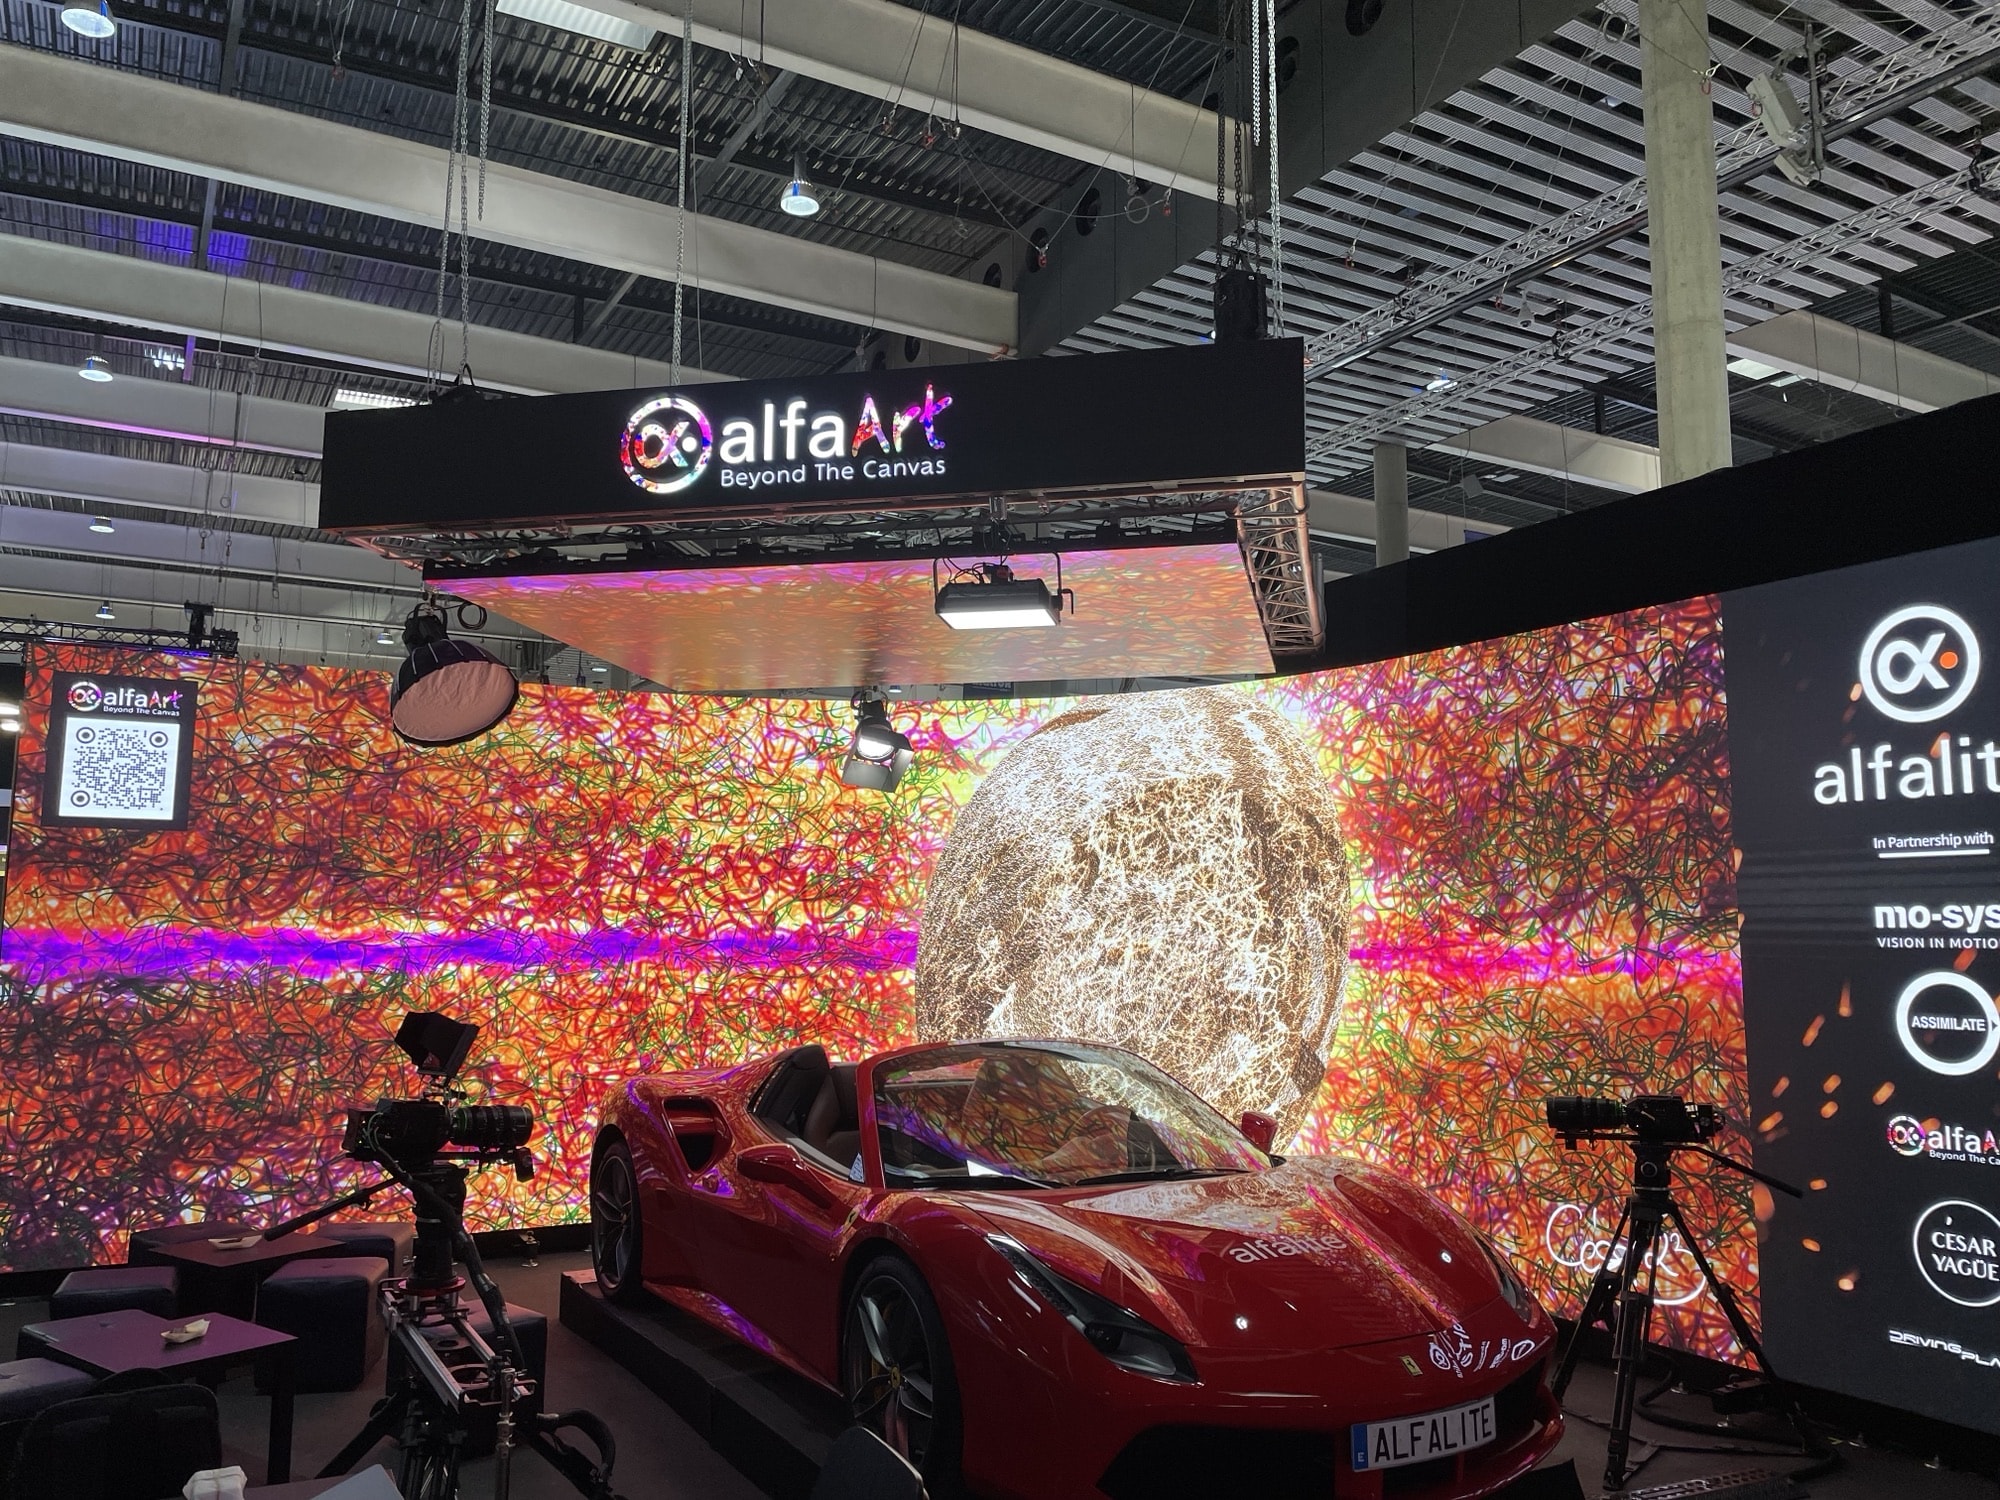 Large-Format LED Displays with Moving Ambient Art